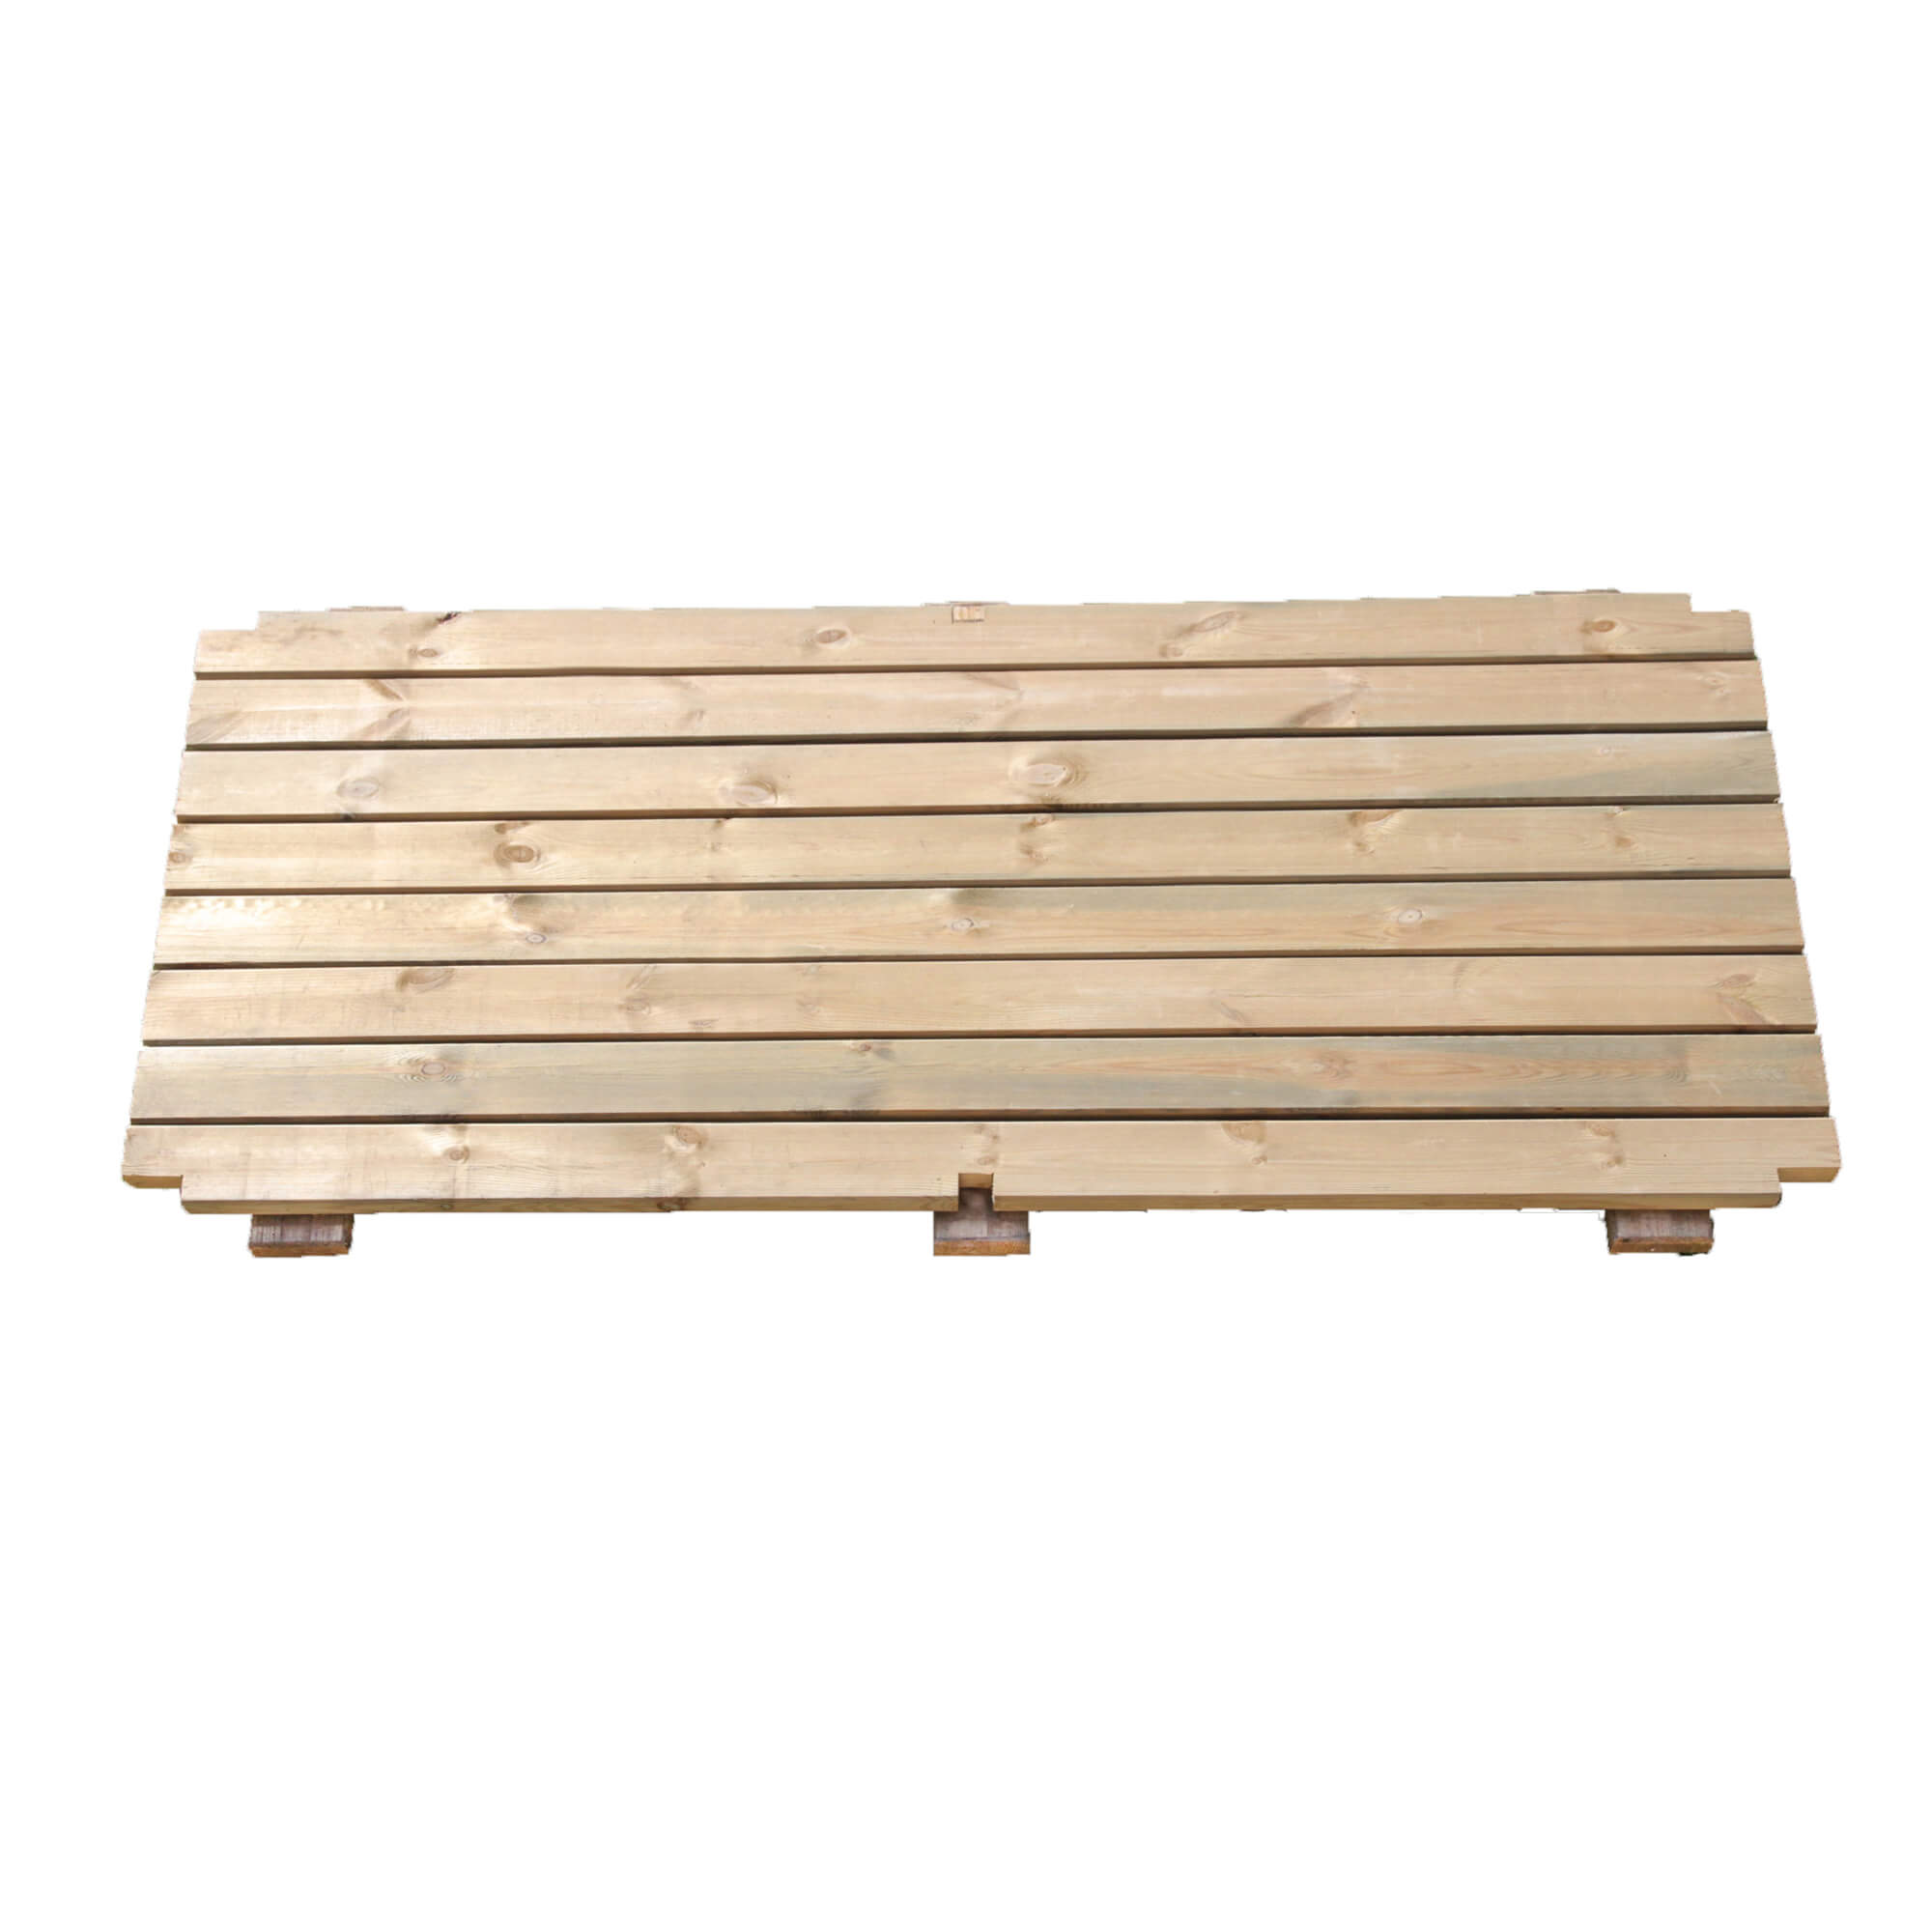 Base For Wide Sleeper Raised Bed or Aquatic Planter